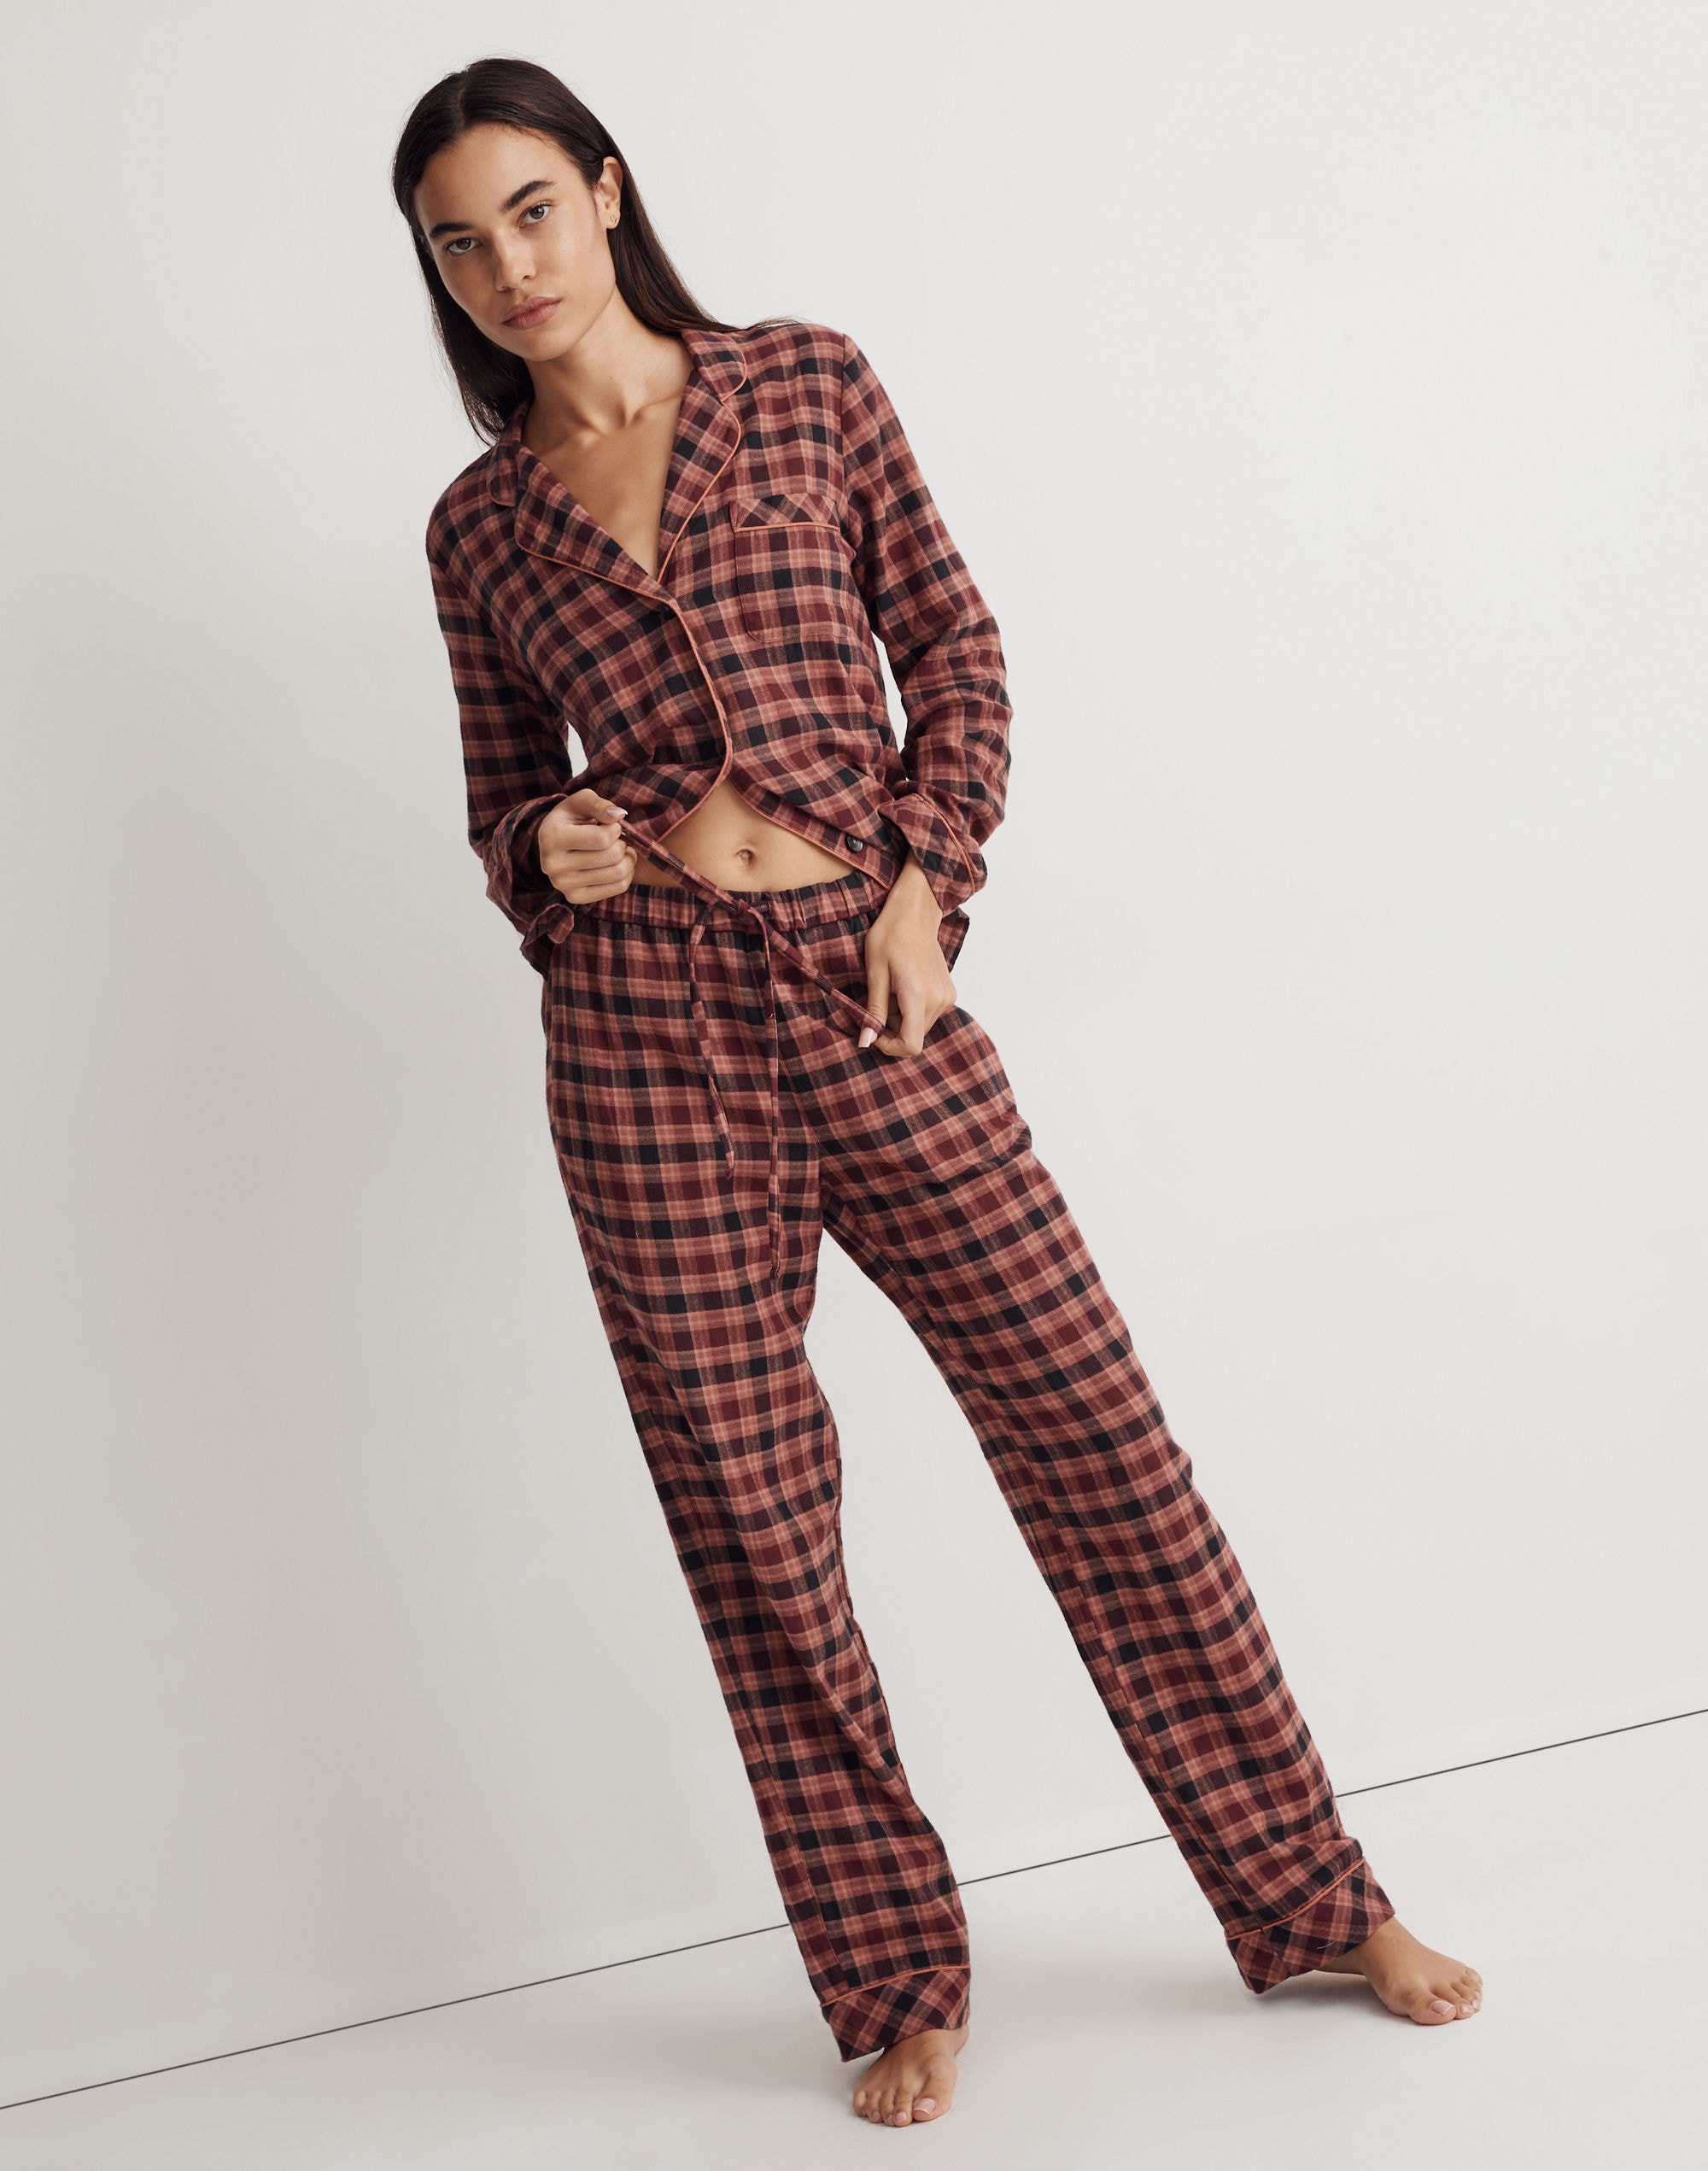 https://www.madewell.com/images/NH958_WY9932_m